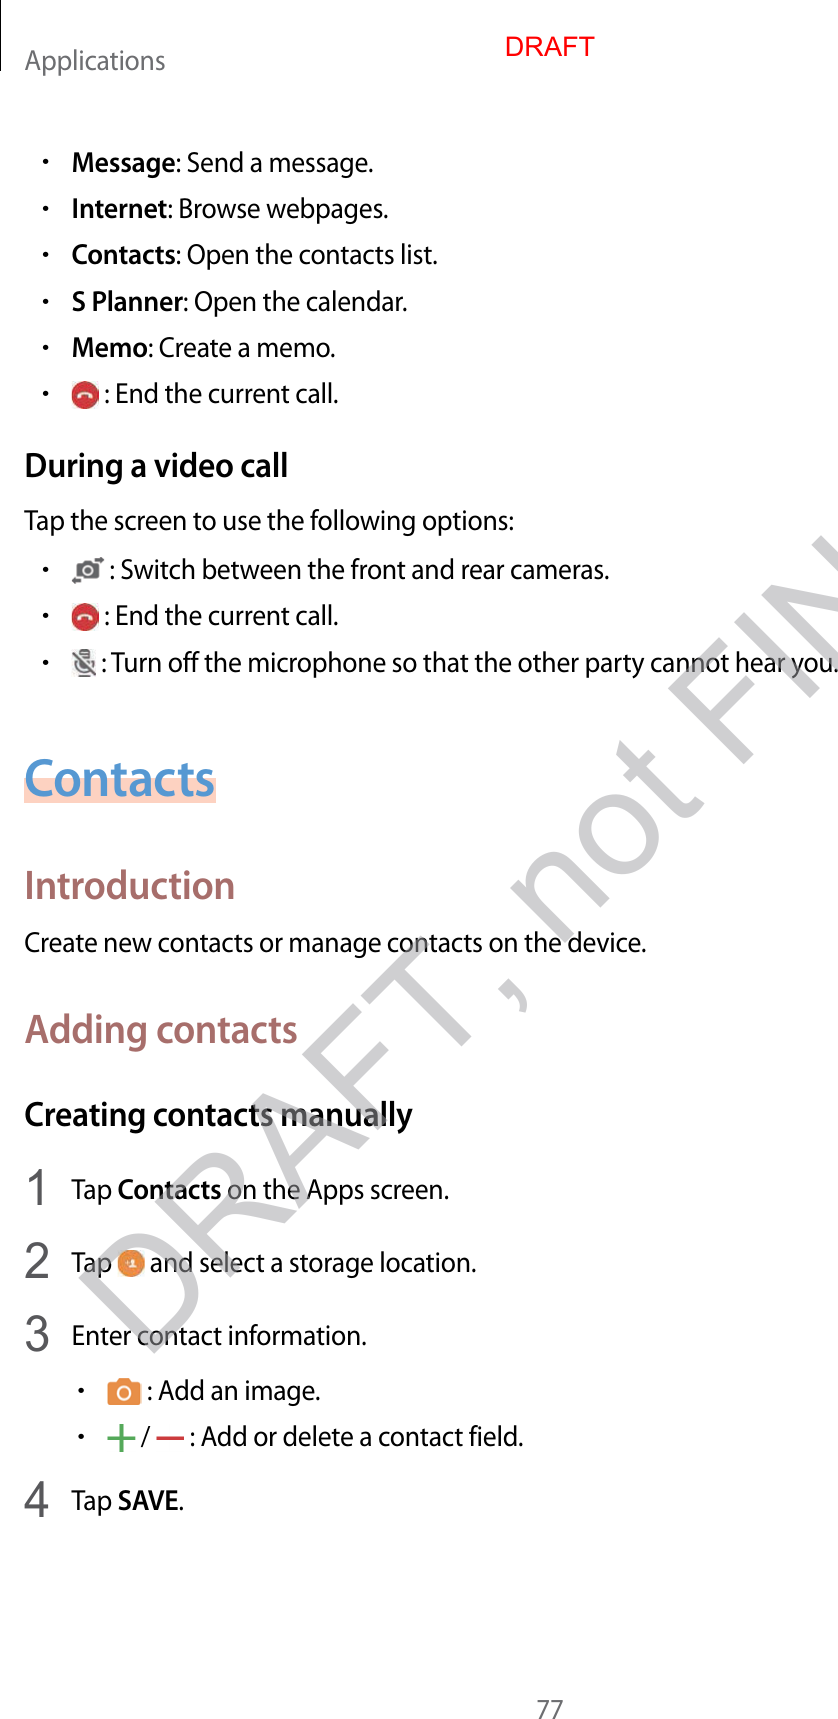 Applications77•Message: Send a message.•Internet: Brow se w ebpages .•Contacts: Open the contacts list.•S Planner: Open the calendar.•Memo: Creat e a memo.• : End the current call .During a video callTap the screen to use the f ollo wing options:• : Switch between the fr on t and r ear cameras .• : End the current call .• : Turn off the microphone so tha t the other party cannot hear you.ContactsIntroductionCreat e new c ontacts or manage contacts on the device.A dding con tactsCrea ting c ontacts manually1  Tap Contacts on the Apps screen.2  Tap   and select a storage location.3  Enter con tact information.• : Add an image .• /   : Add or delet e a con tact field.4  Tap SAVE.DRAFTDRAFT, not FINAL